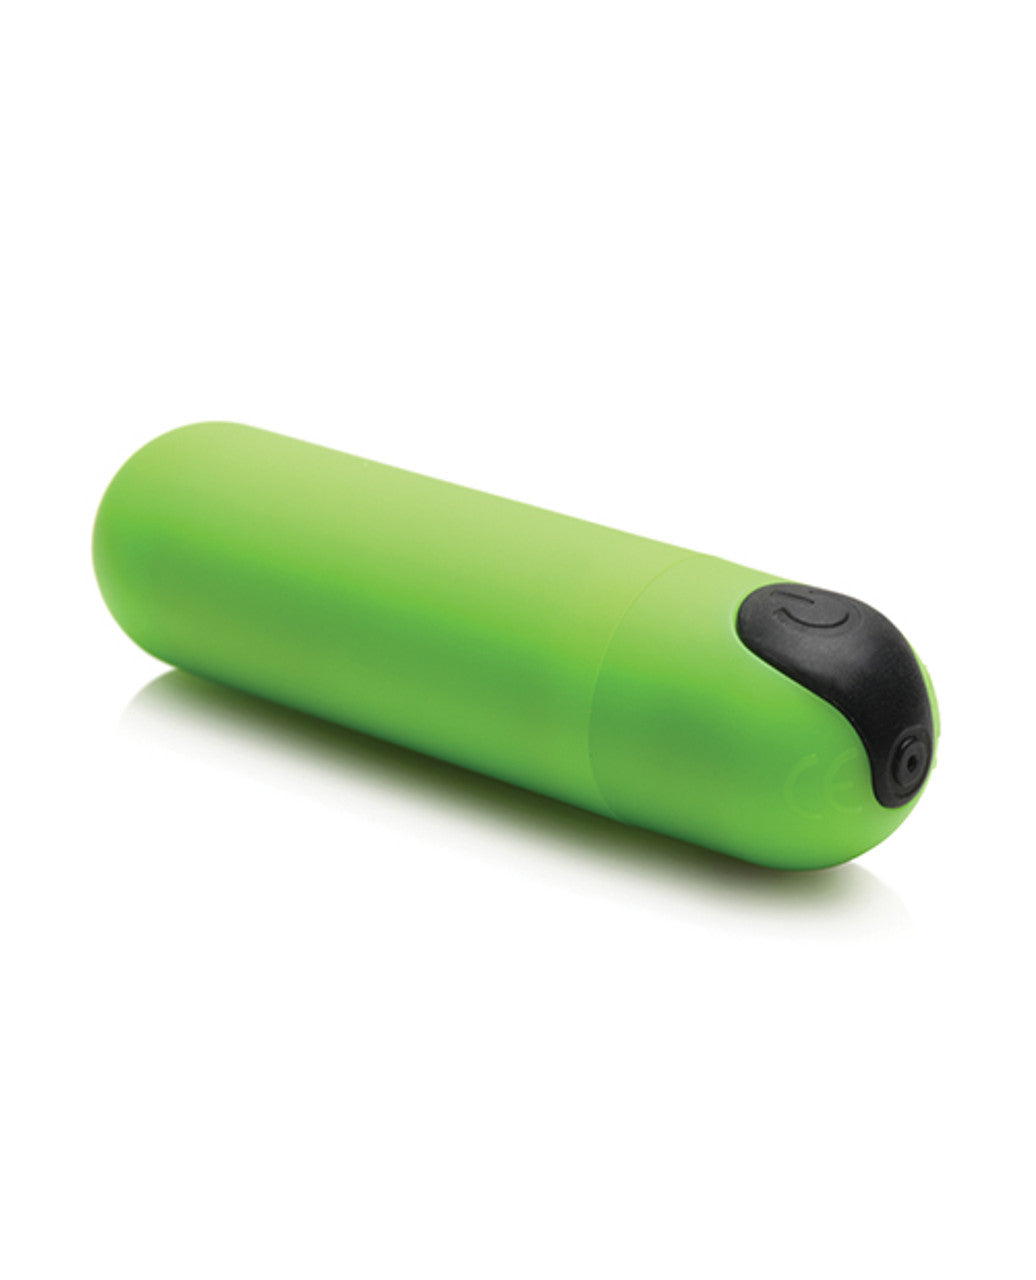 Glow in the Dark Bullet With Remote - Green-0